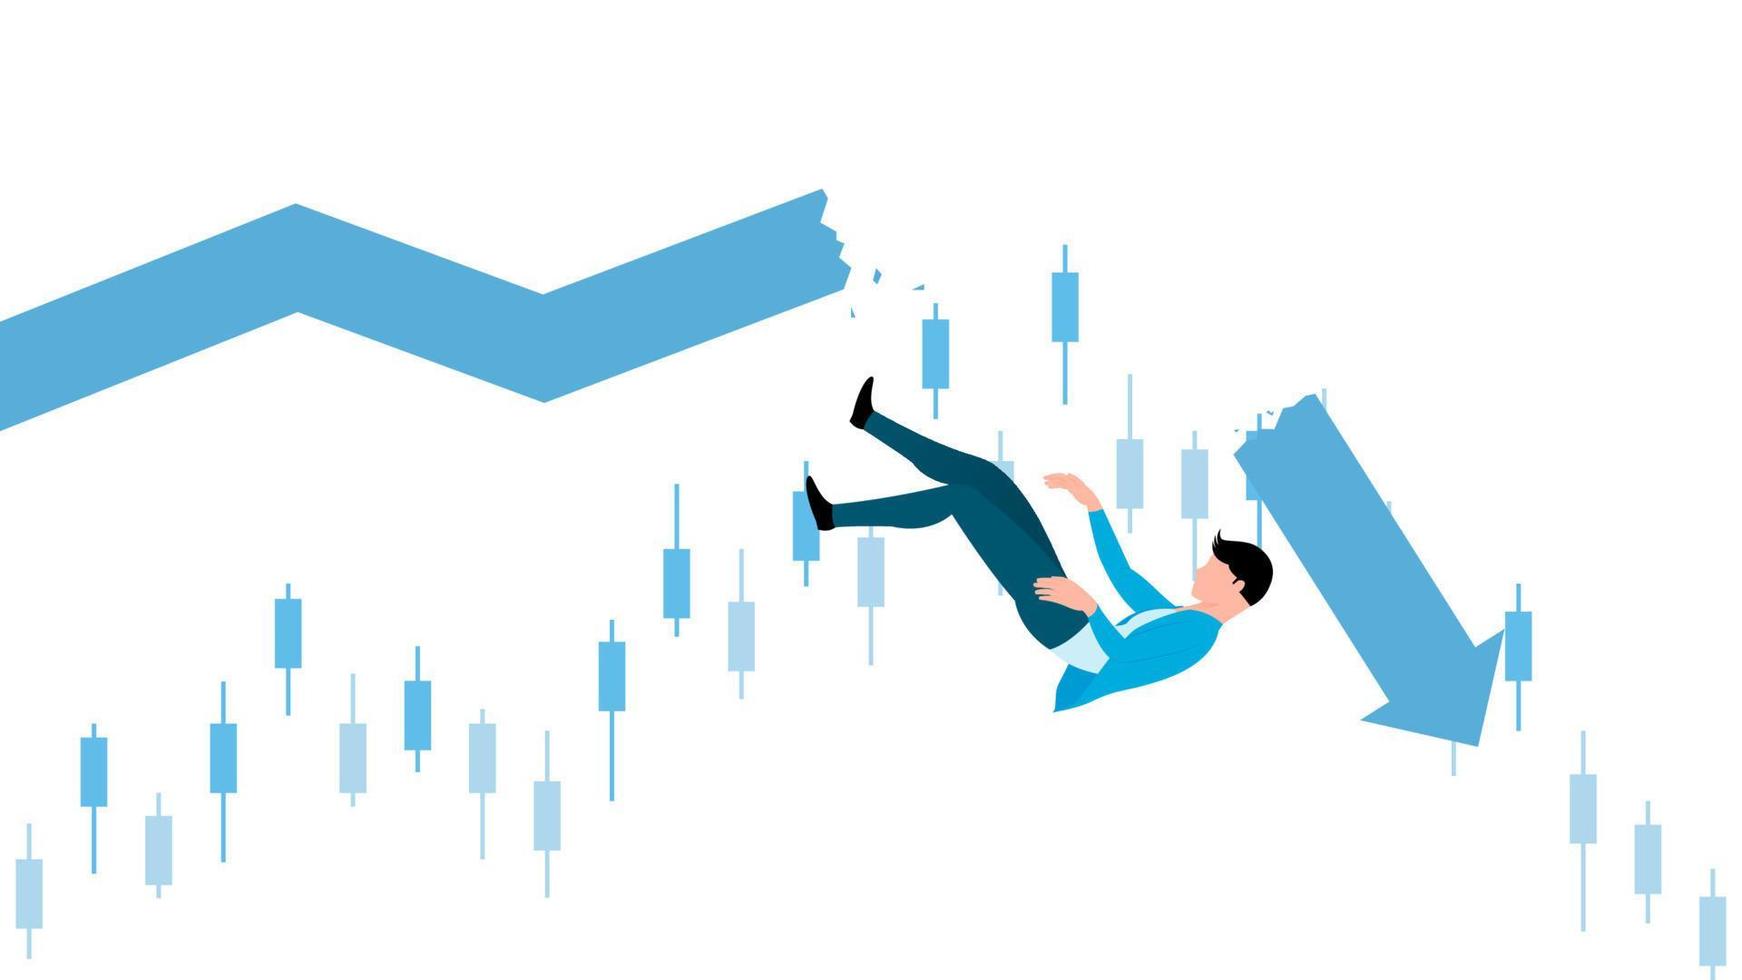 Man falling from graph, business character vector illustration on white background.